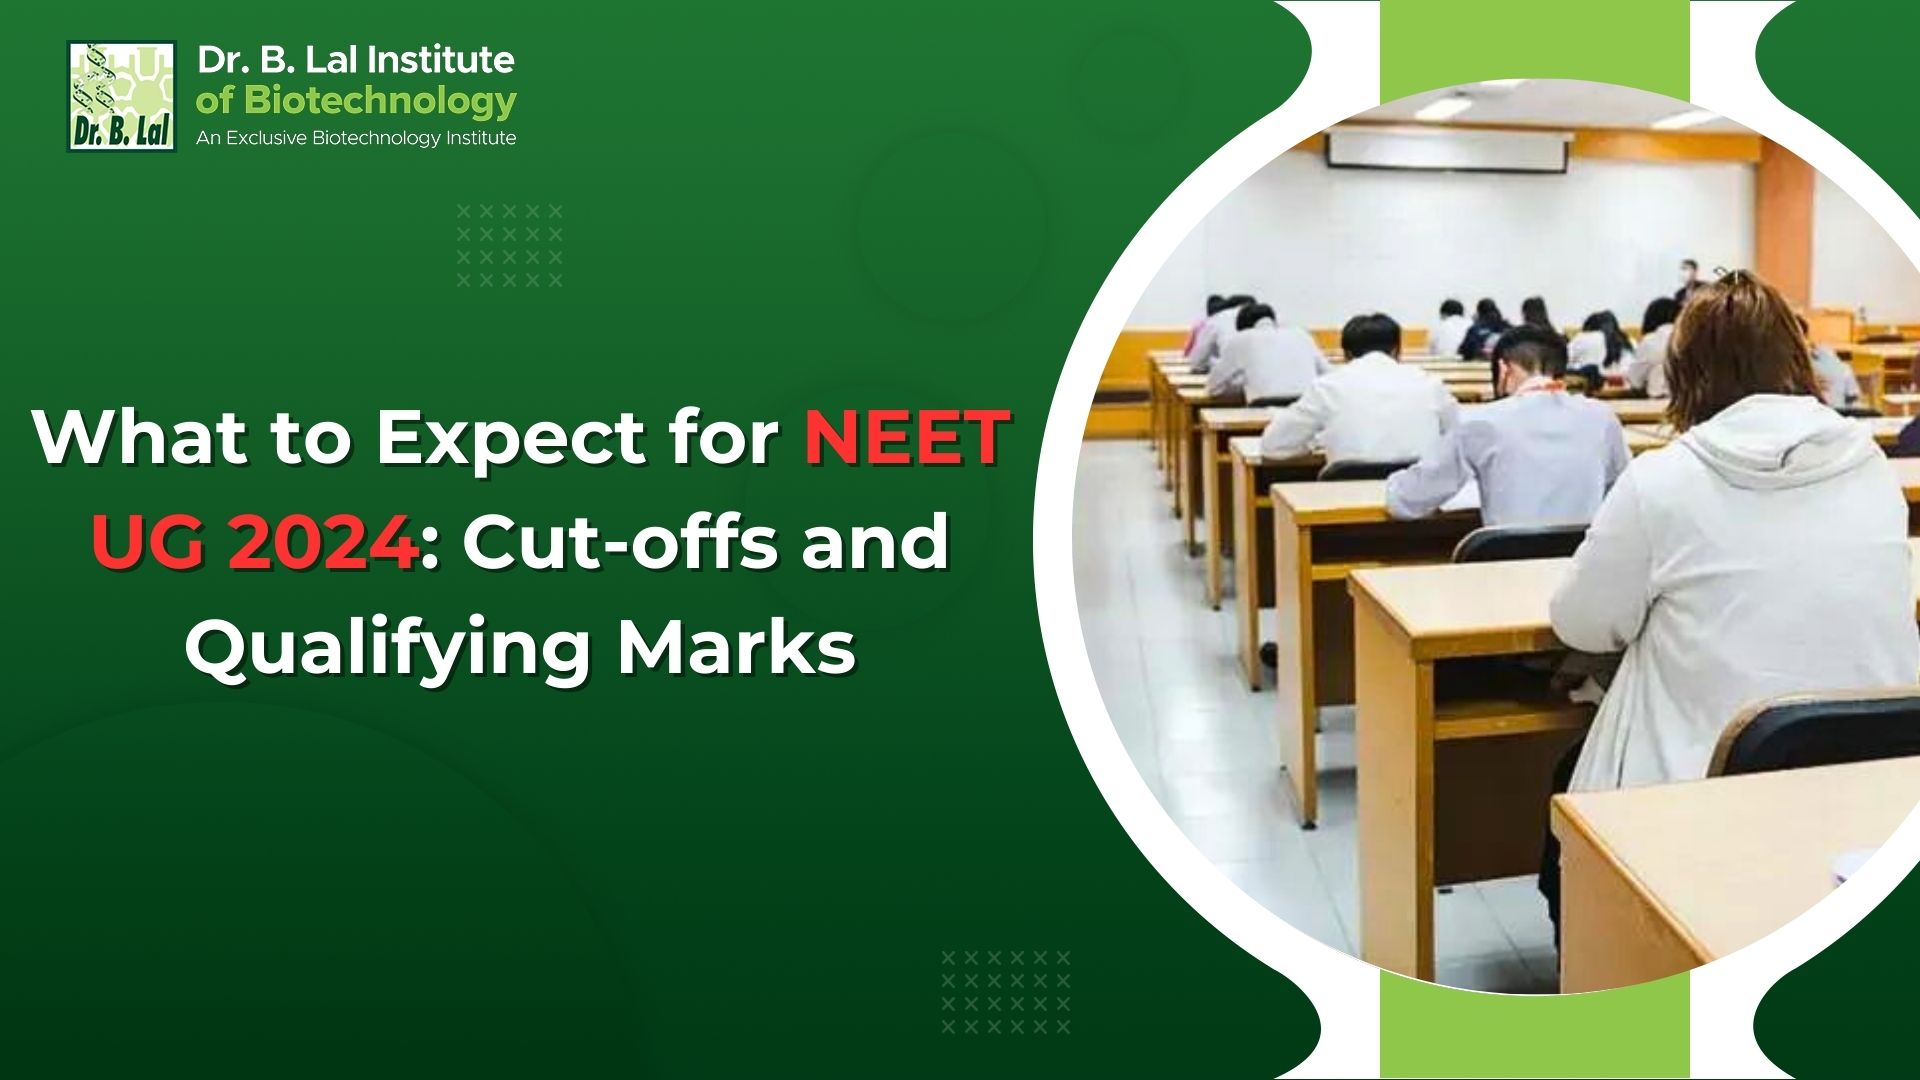 What to Expect for NEET UG 2024: Cut-offs and Qualifying Marks